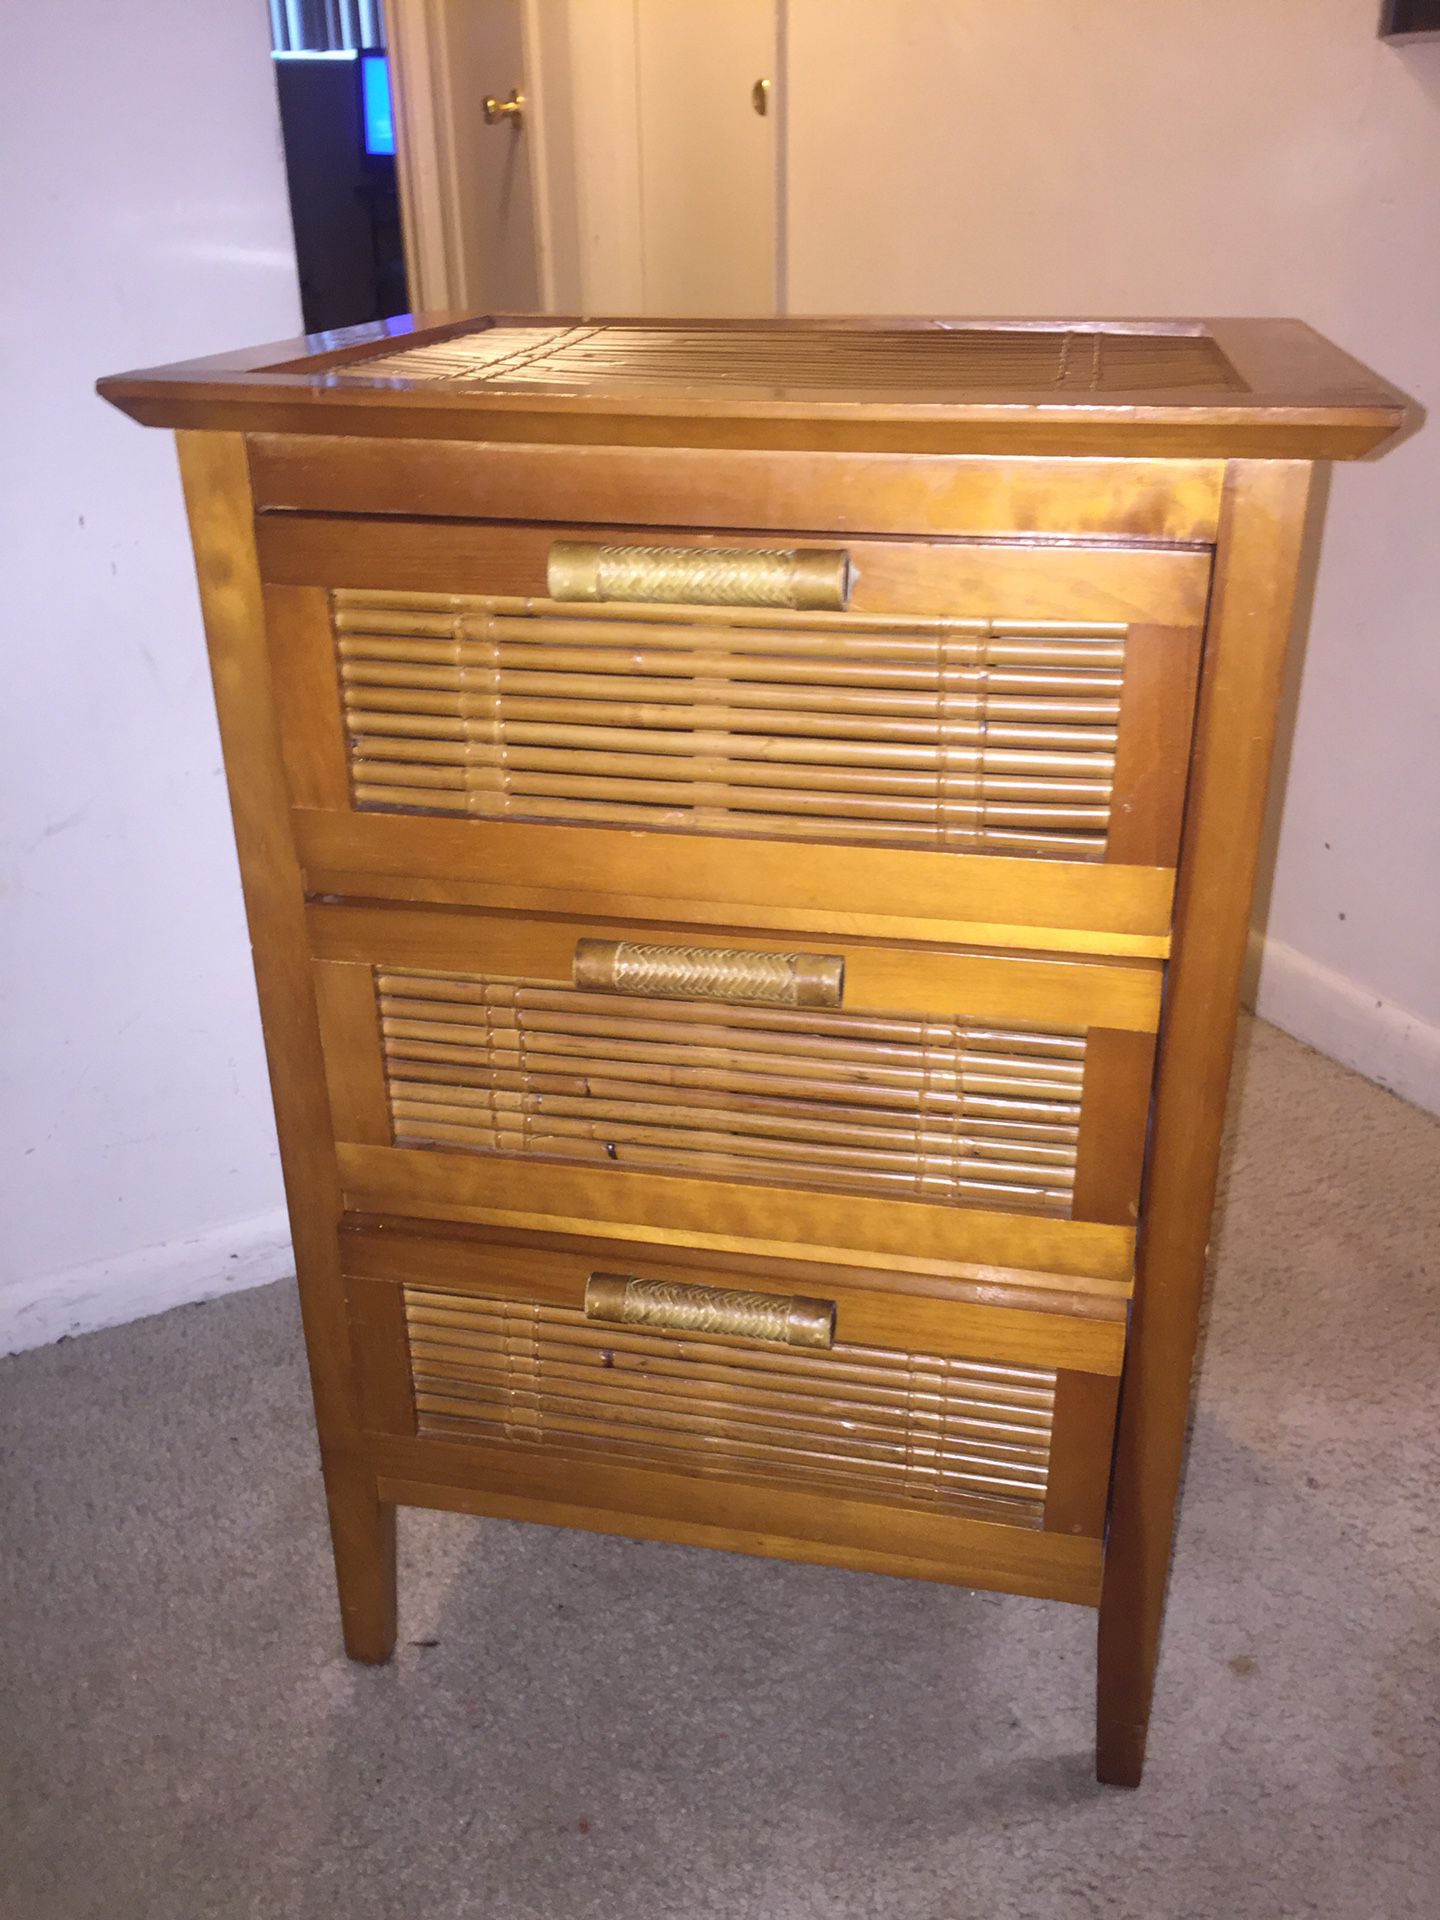 3-Drawer Bamboo table / night stand